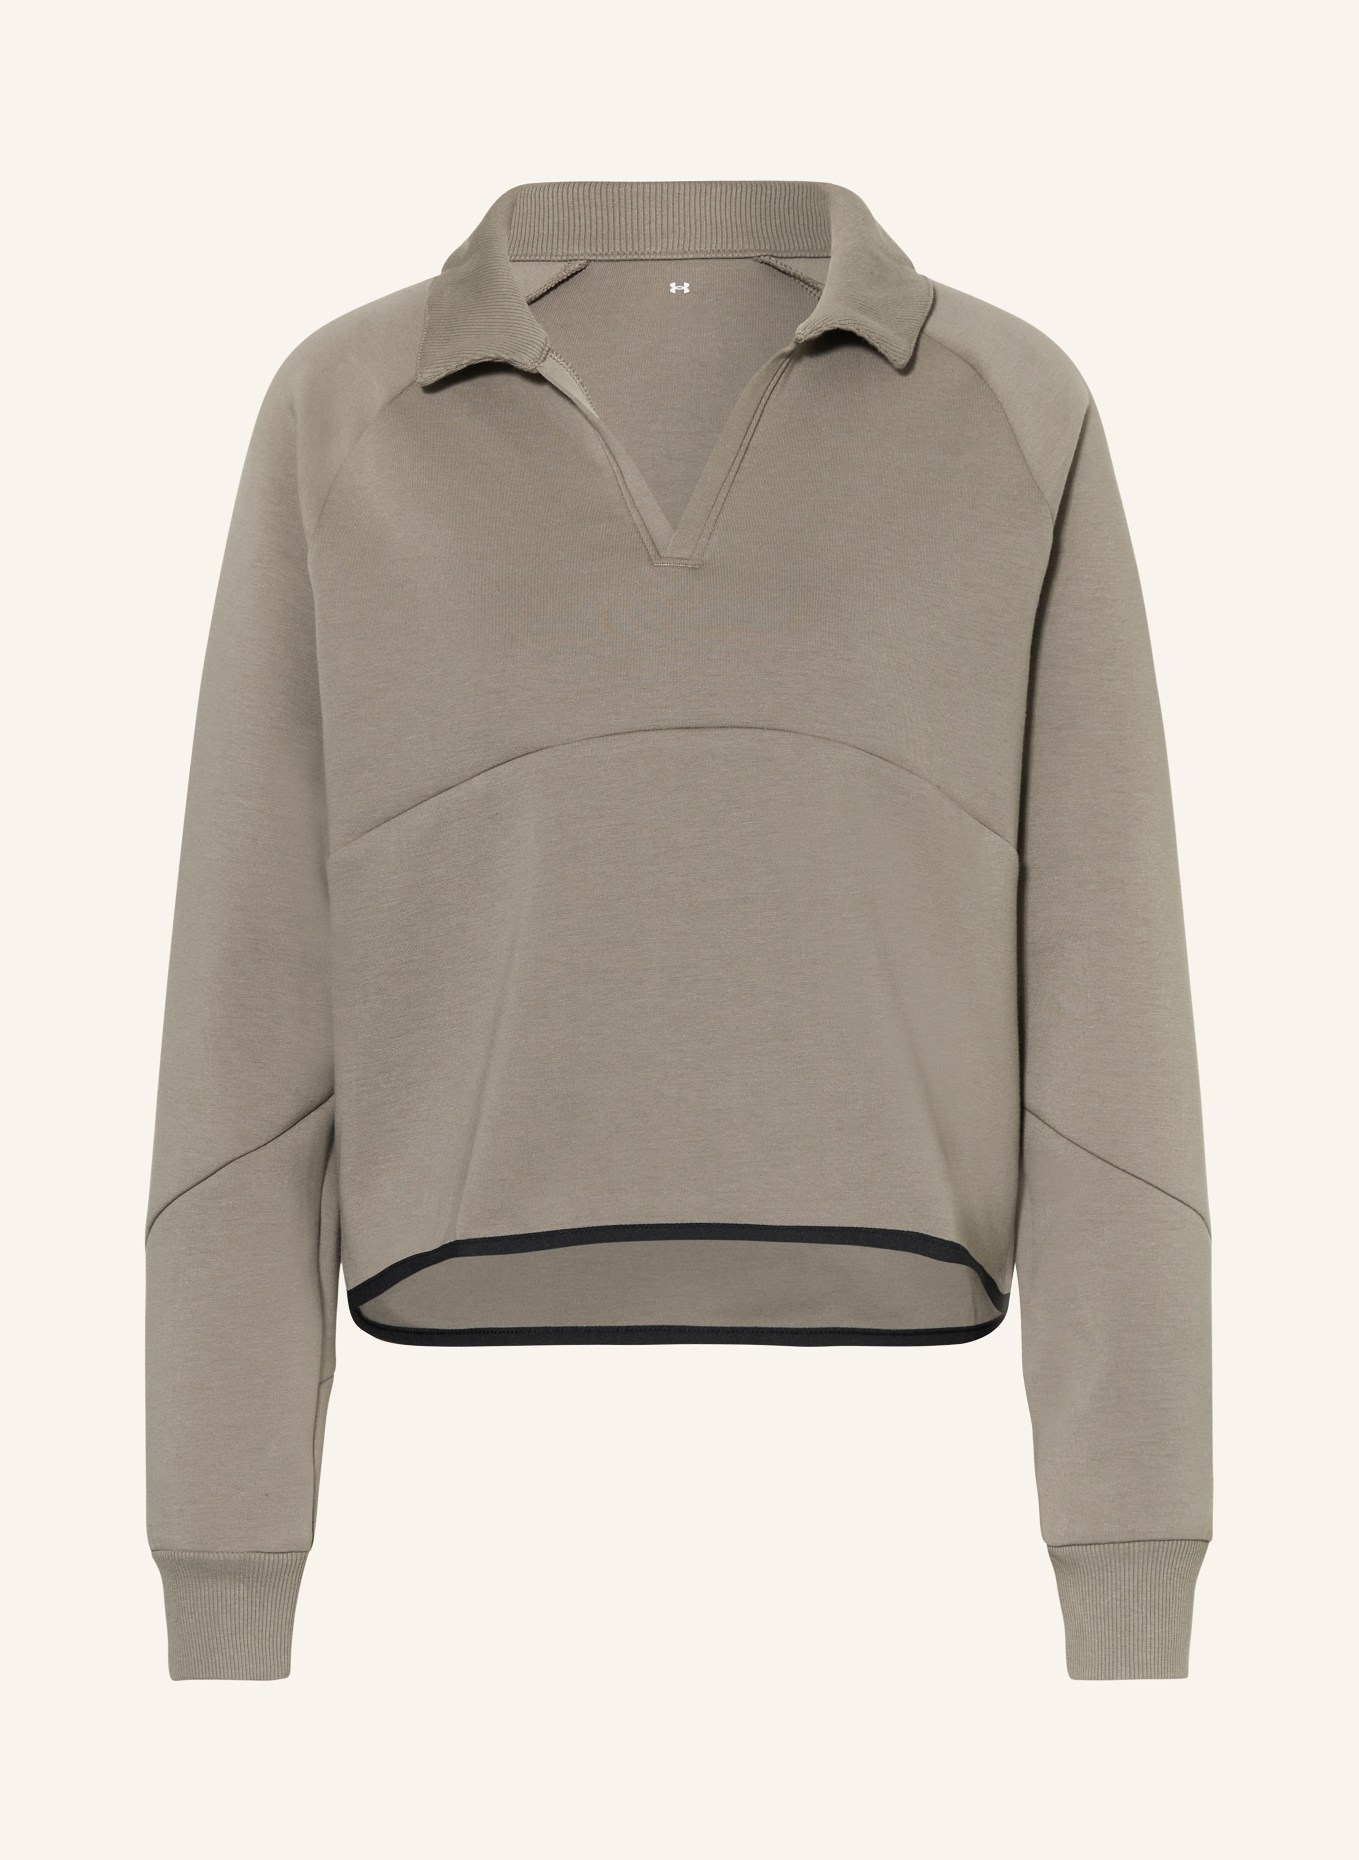 UNDER ARMOUR Sweatshirt UNSTOPPABLE, Farbe: TAUPE (Bild 1)